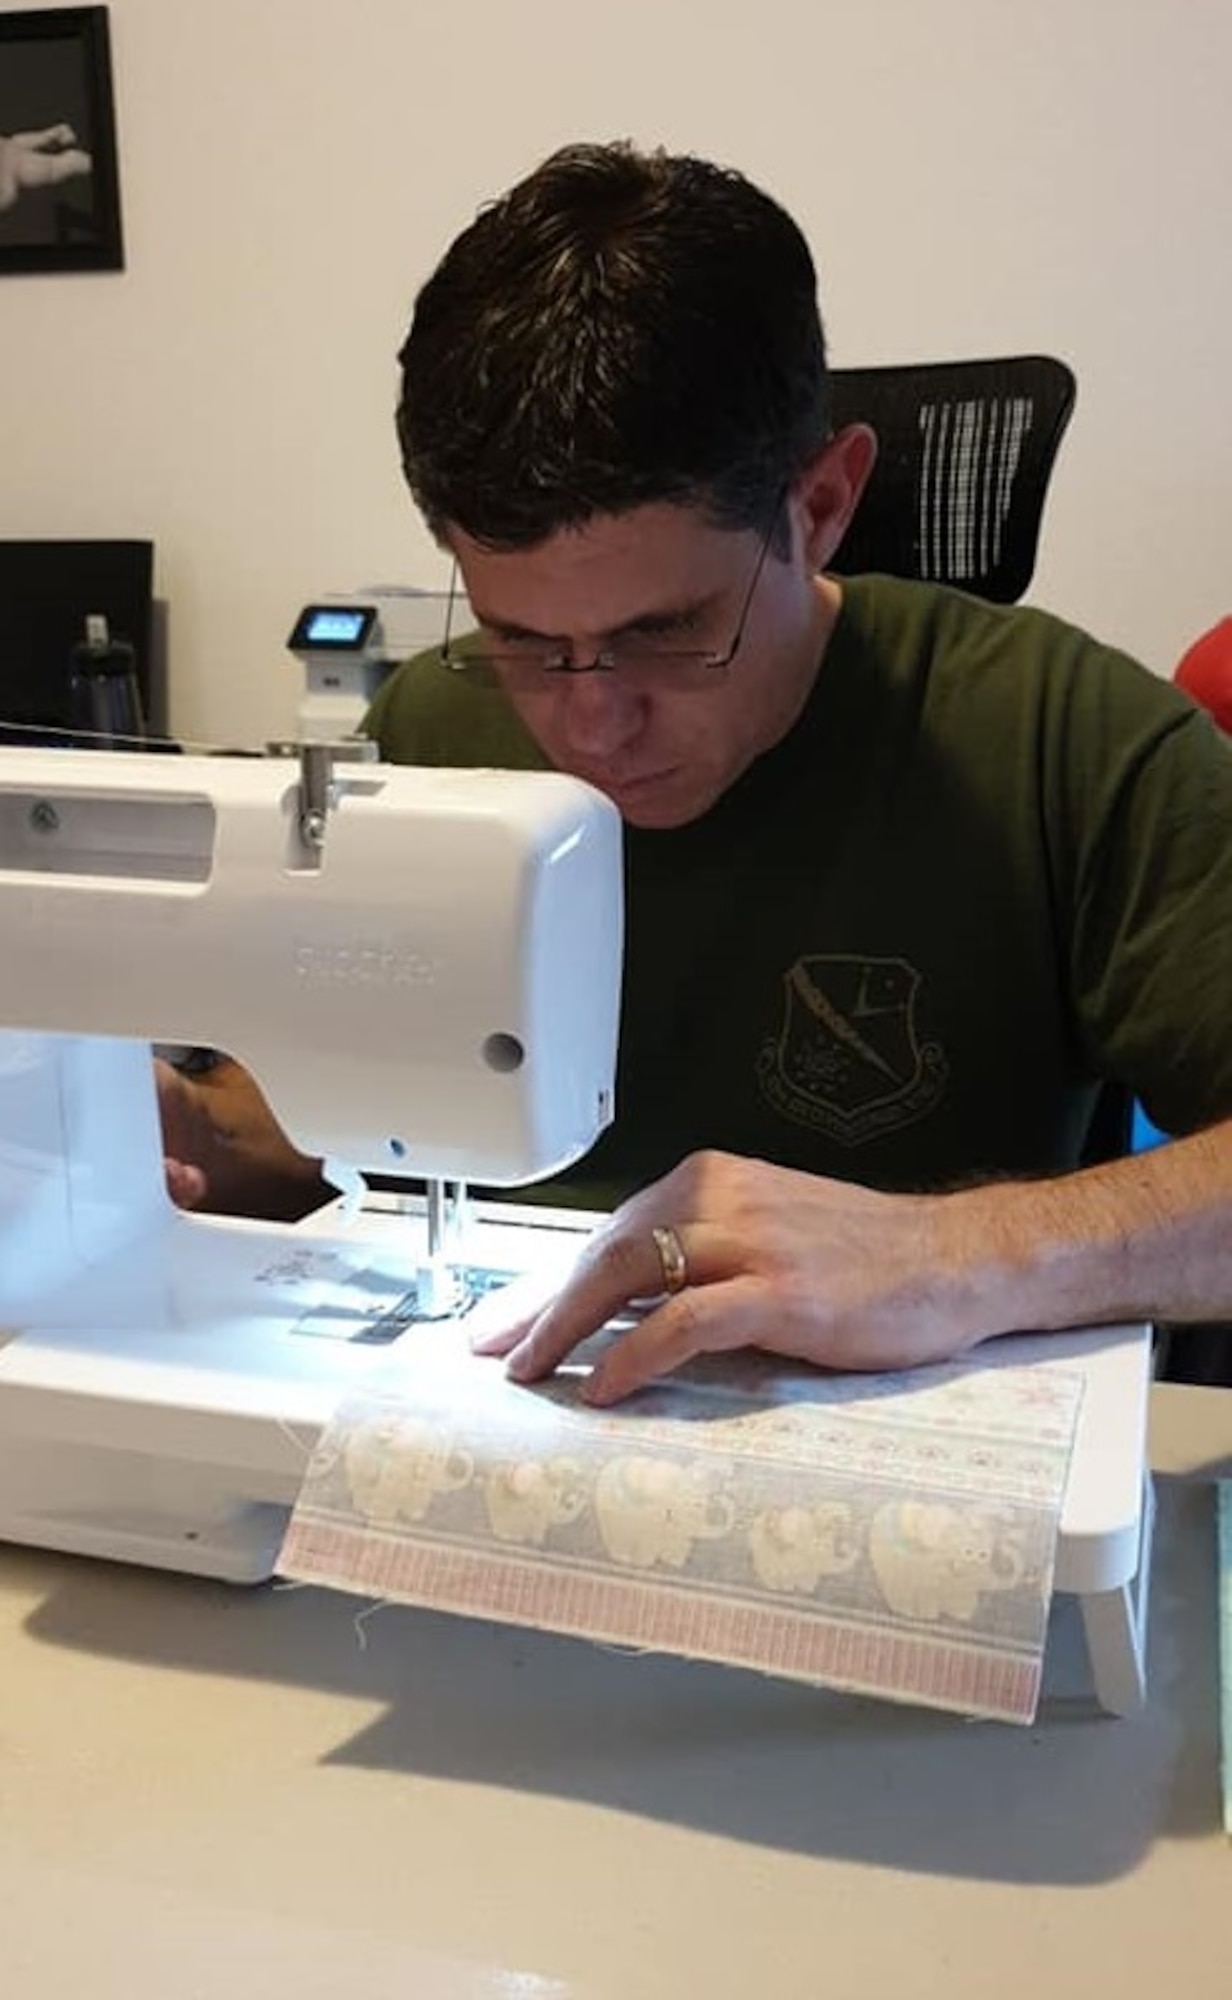 OSI 4th Field Investigations Squadron Special Agent Justin Acree sews fabric for protective masks. His spouse taught him how to use the sewing machine. SA Acree personally made 1,556 face covers for communities across Germany to help cope with the COVID-19 pandemic. (Photo by Mindi Acree)